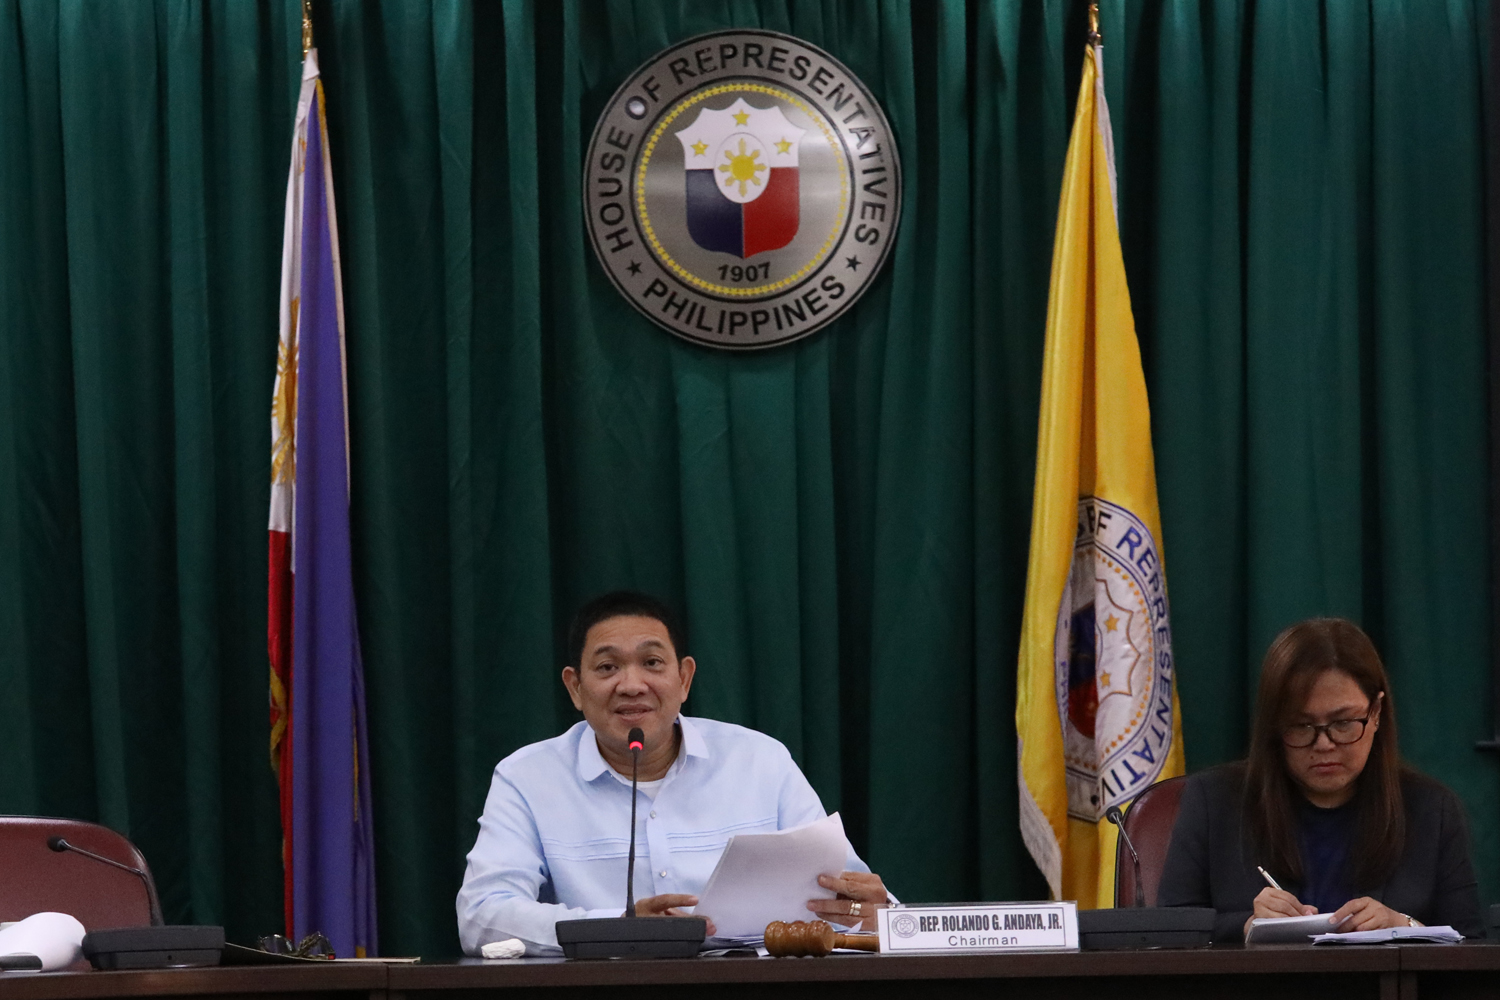 House committee on appropriations chairperson Rolando Andaya Jr makes fresh allegations against DBM Secretary Benjamin Diokno on February 8, 2019. Photo by Darren Langit/Rappler 